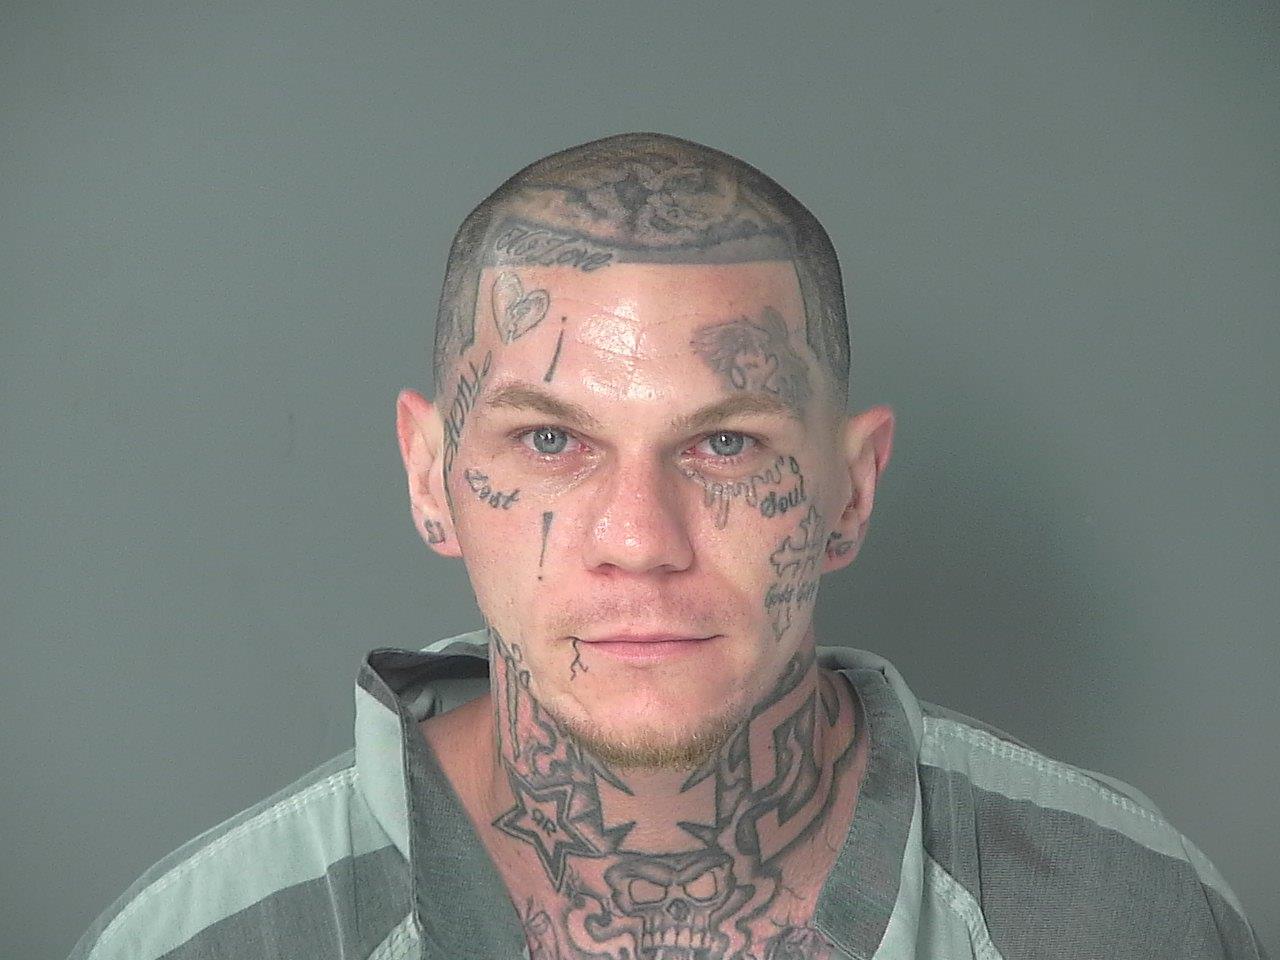 MONTGOMERY COUNTY JAIL BOOKINGS FOR 5/13/19